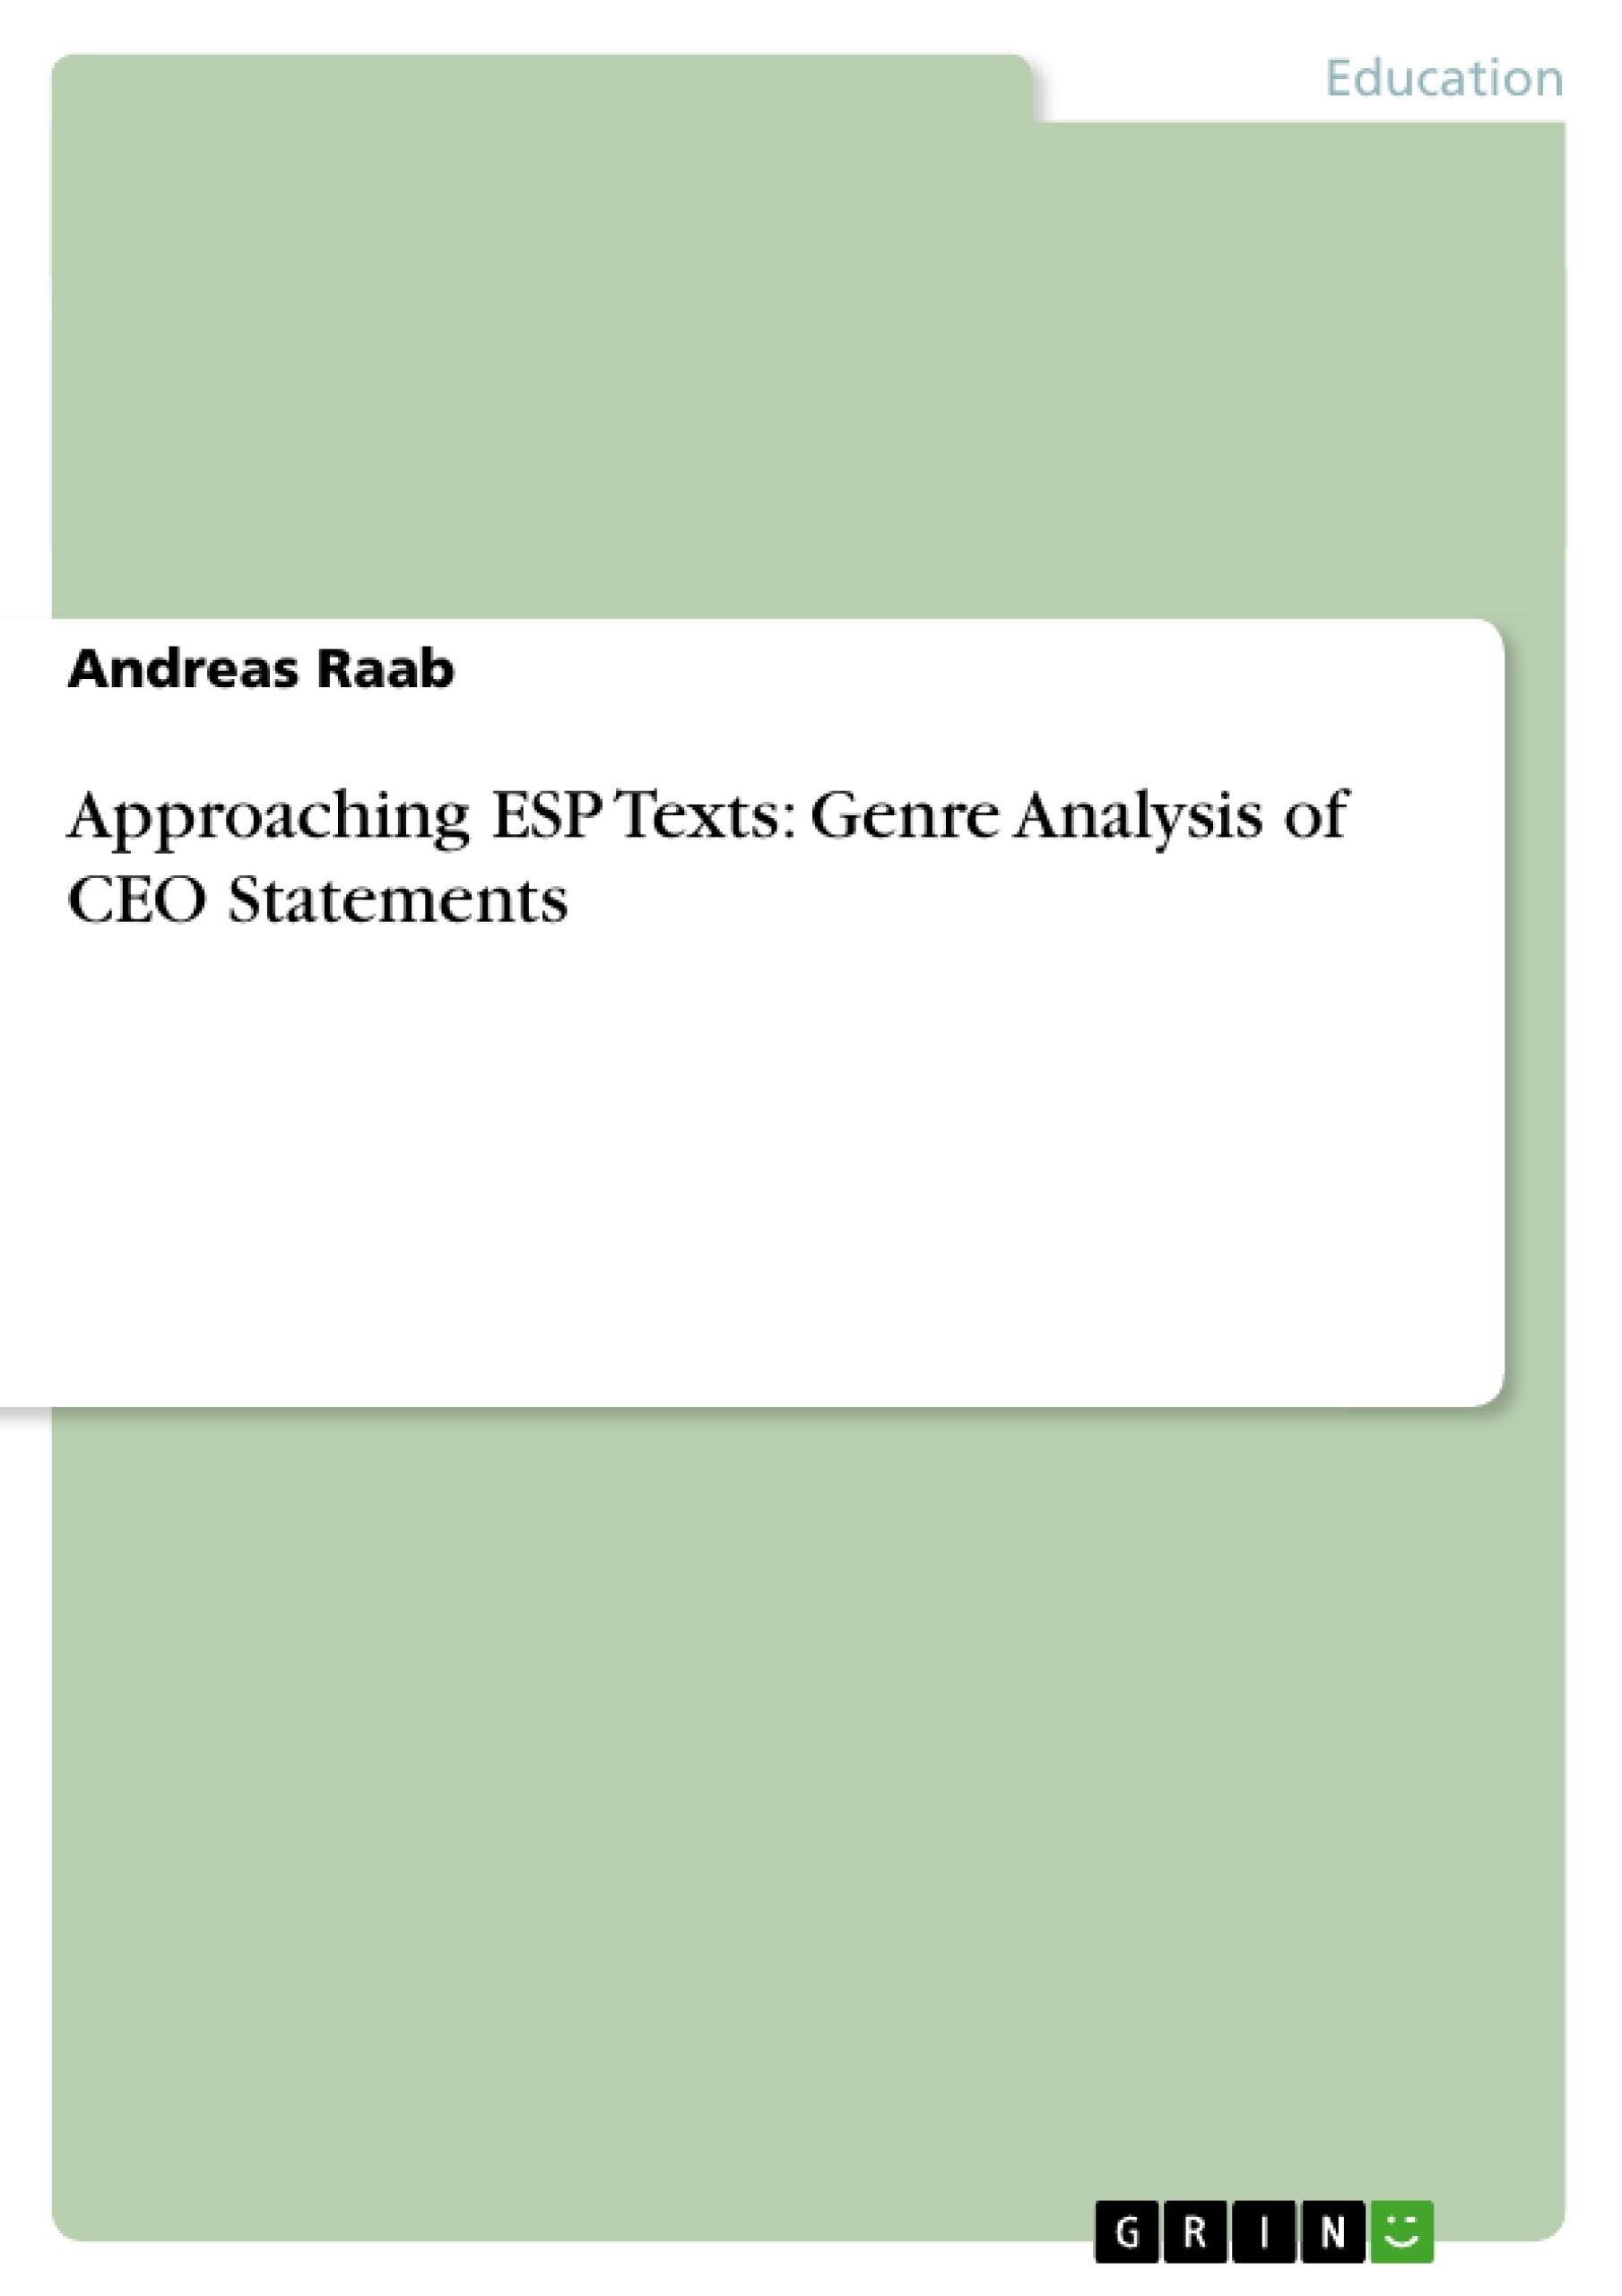 Title: Approaching ESP Texts: Genre Analysis of CEO Statements